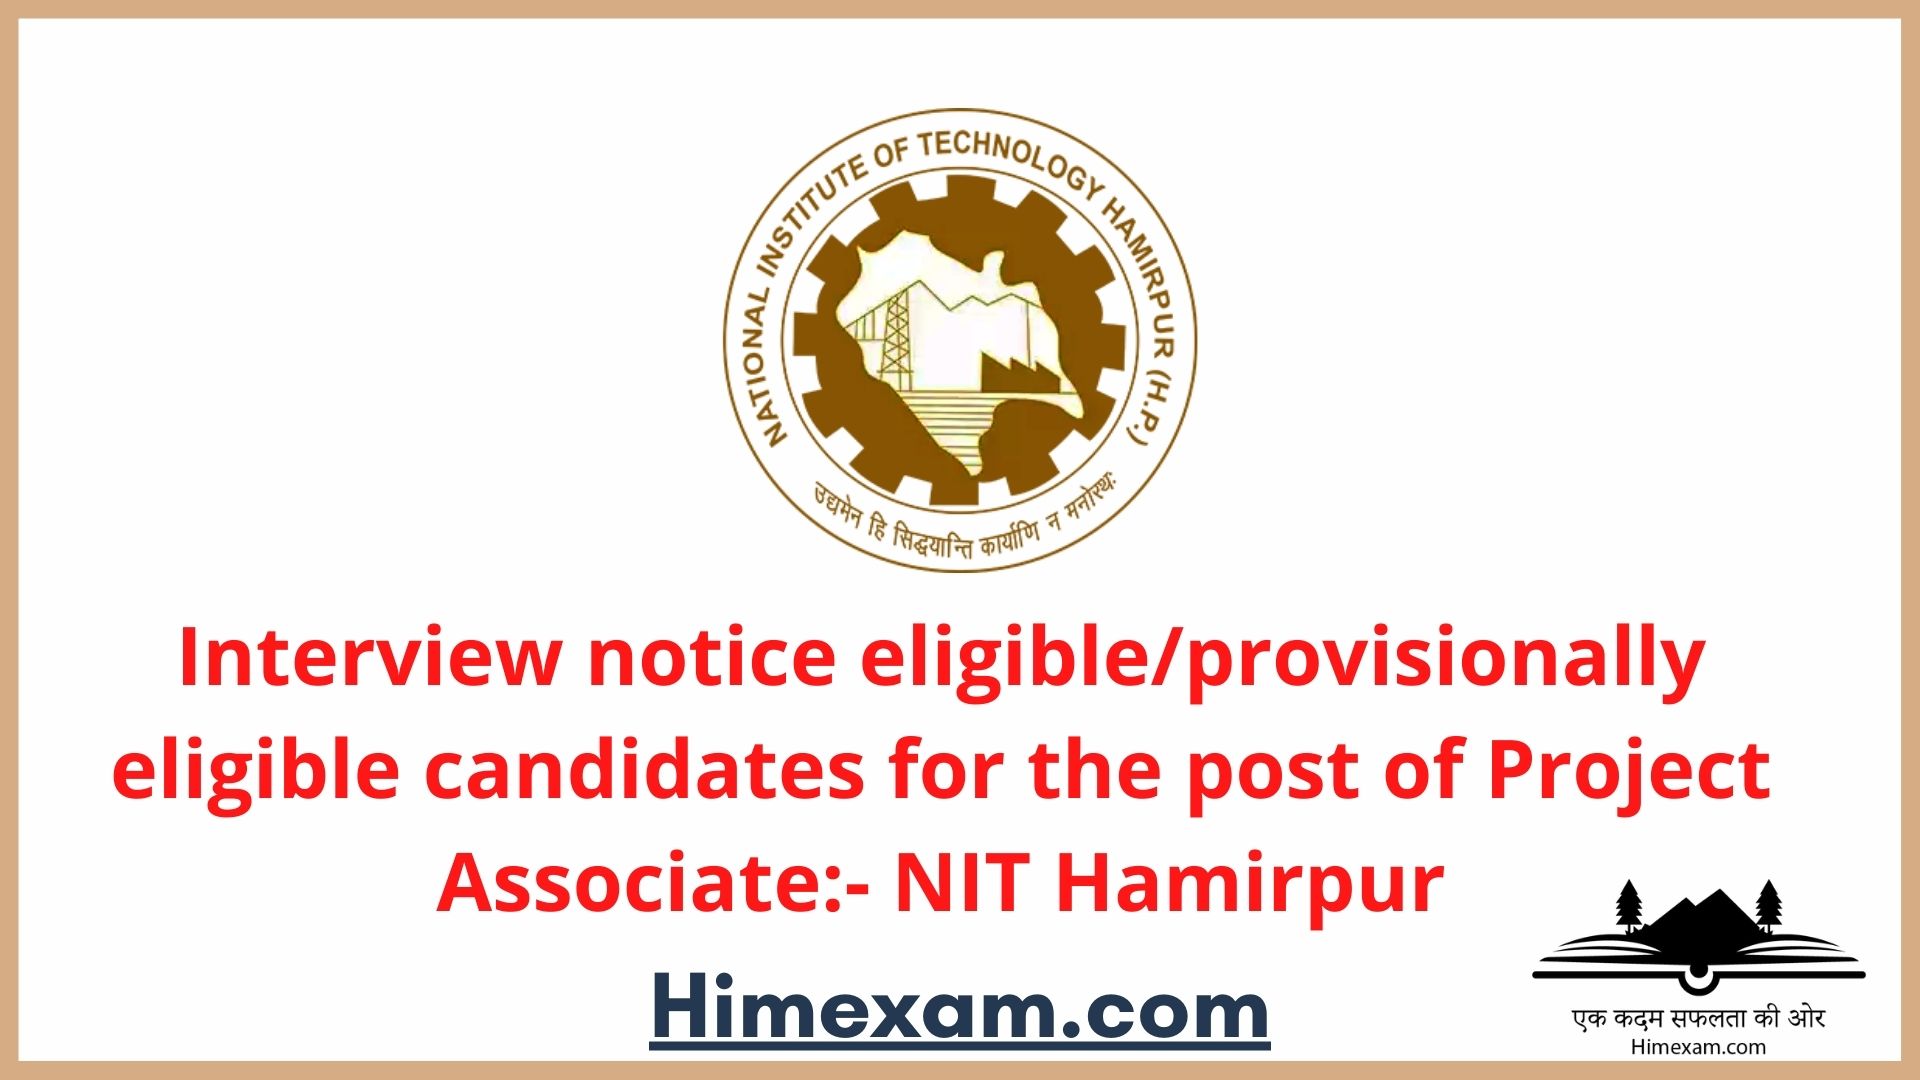 Interview notice eligible/provisionally eligible candidates for the post of Project Associate:- NIT Hamirpur